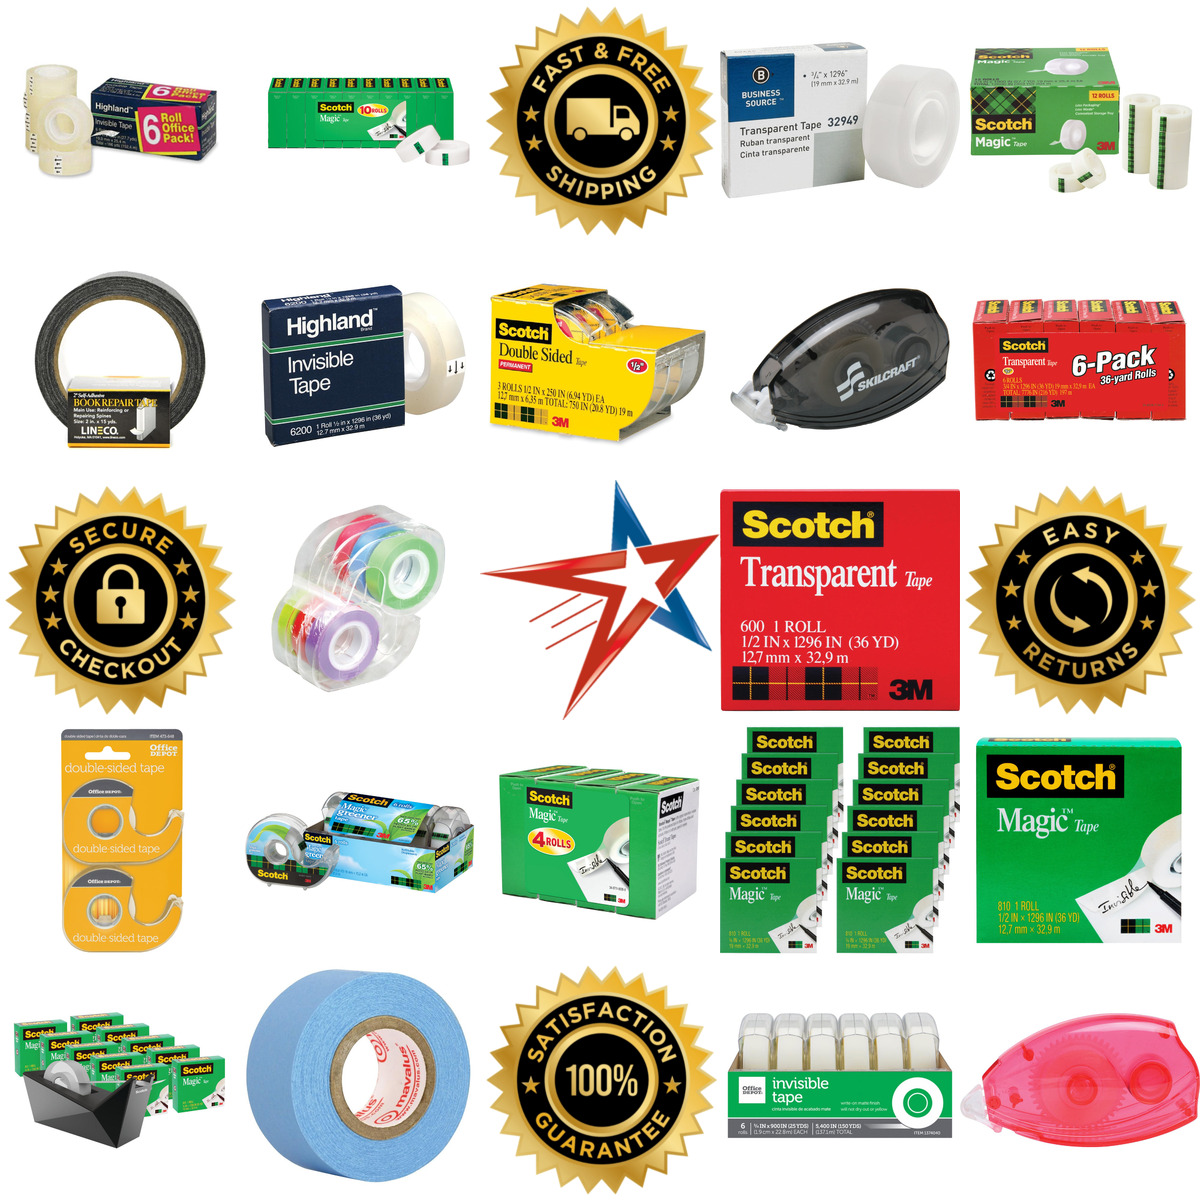 A selection of Office Tape products on GoVets